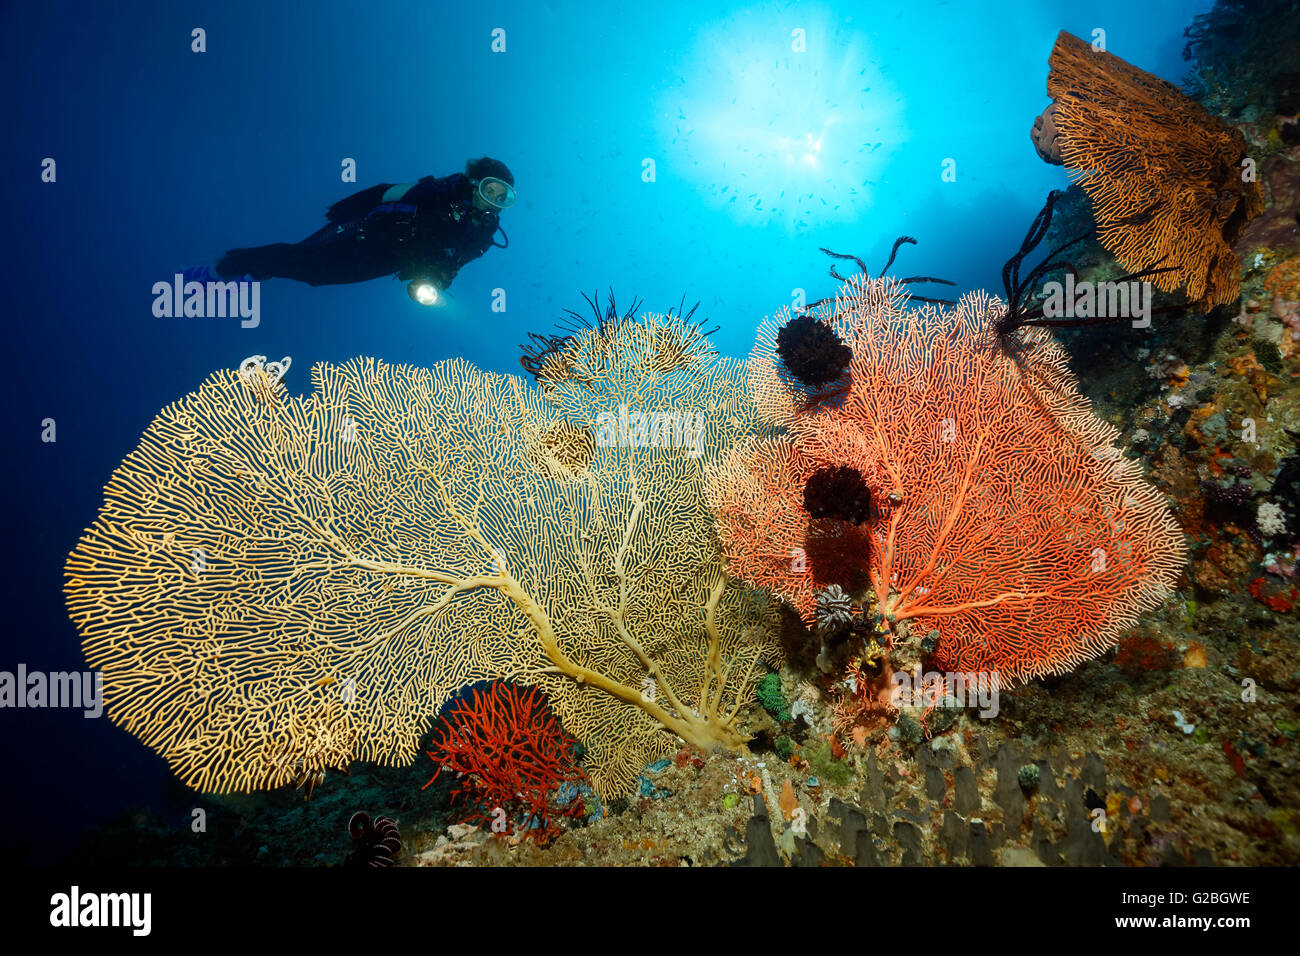 Diver backlit over coral reef with various gorgonians, Great Barrier Reef, Queensland, Cairns, Pacific Ocean, Australia Stock Photo